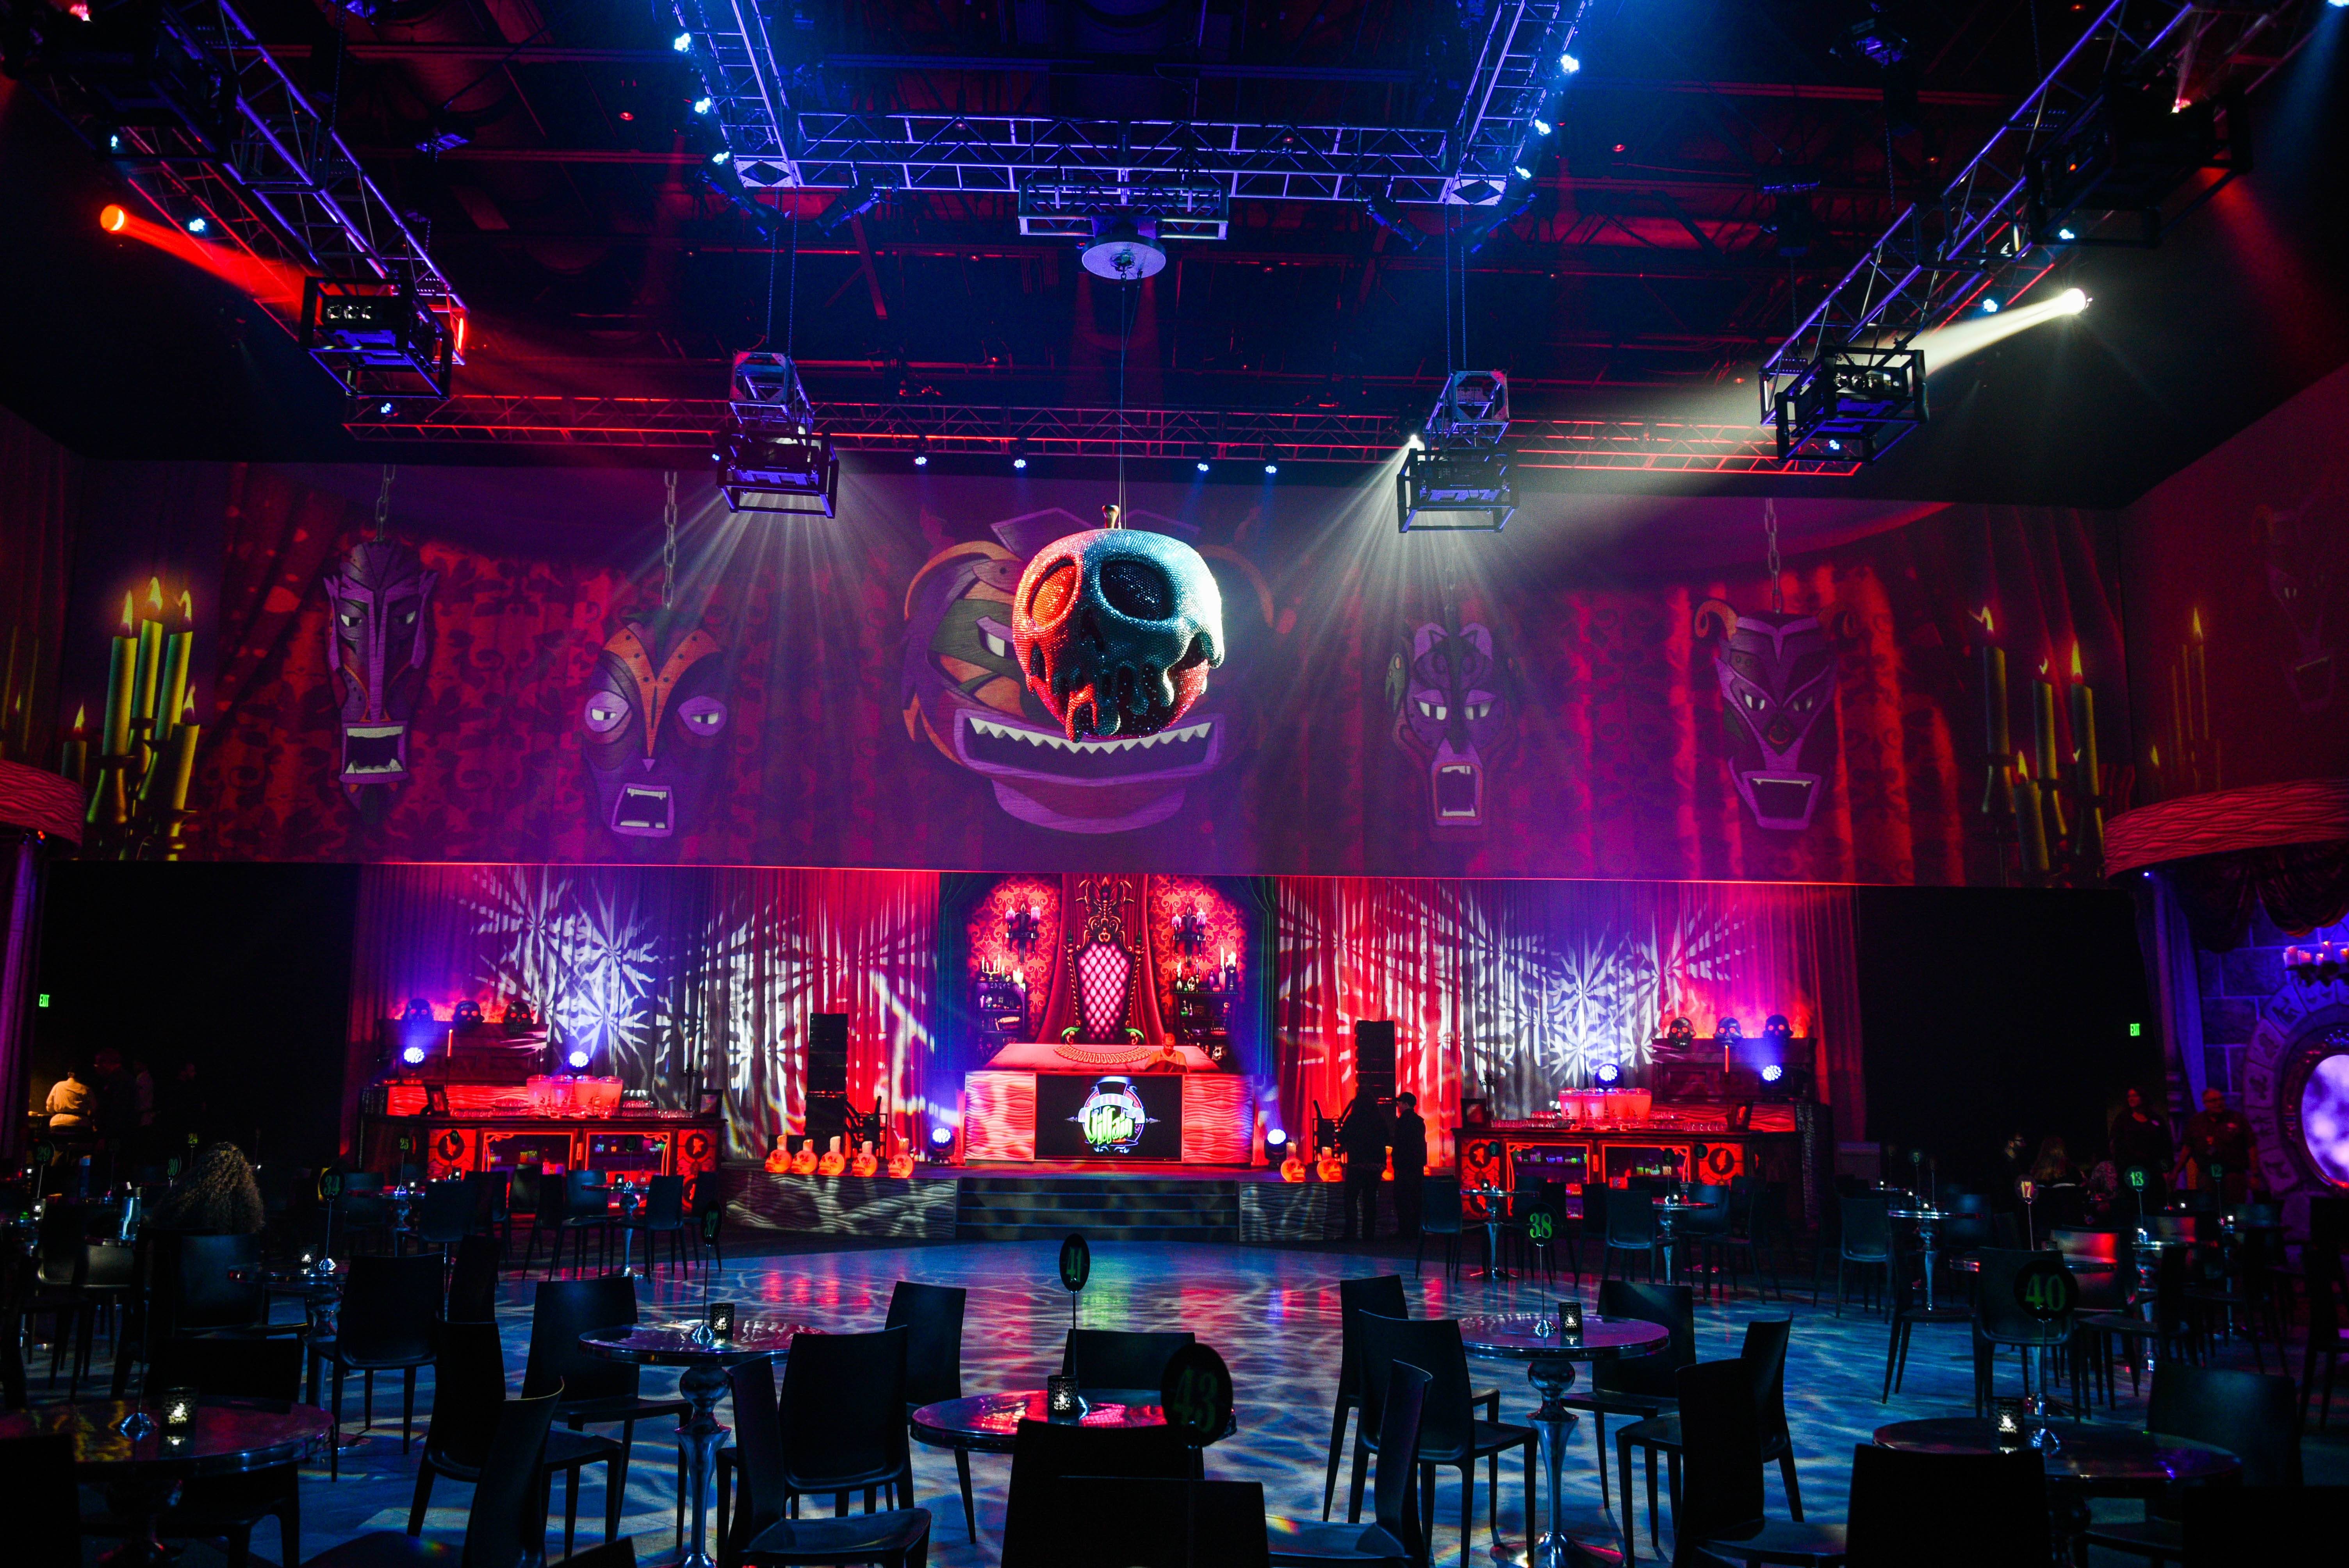 'Club Villain' ticketed event coming to Disney's Hollywood Studios in January 2016